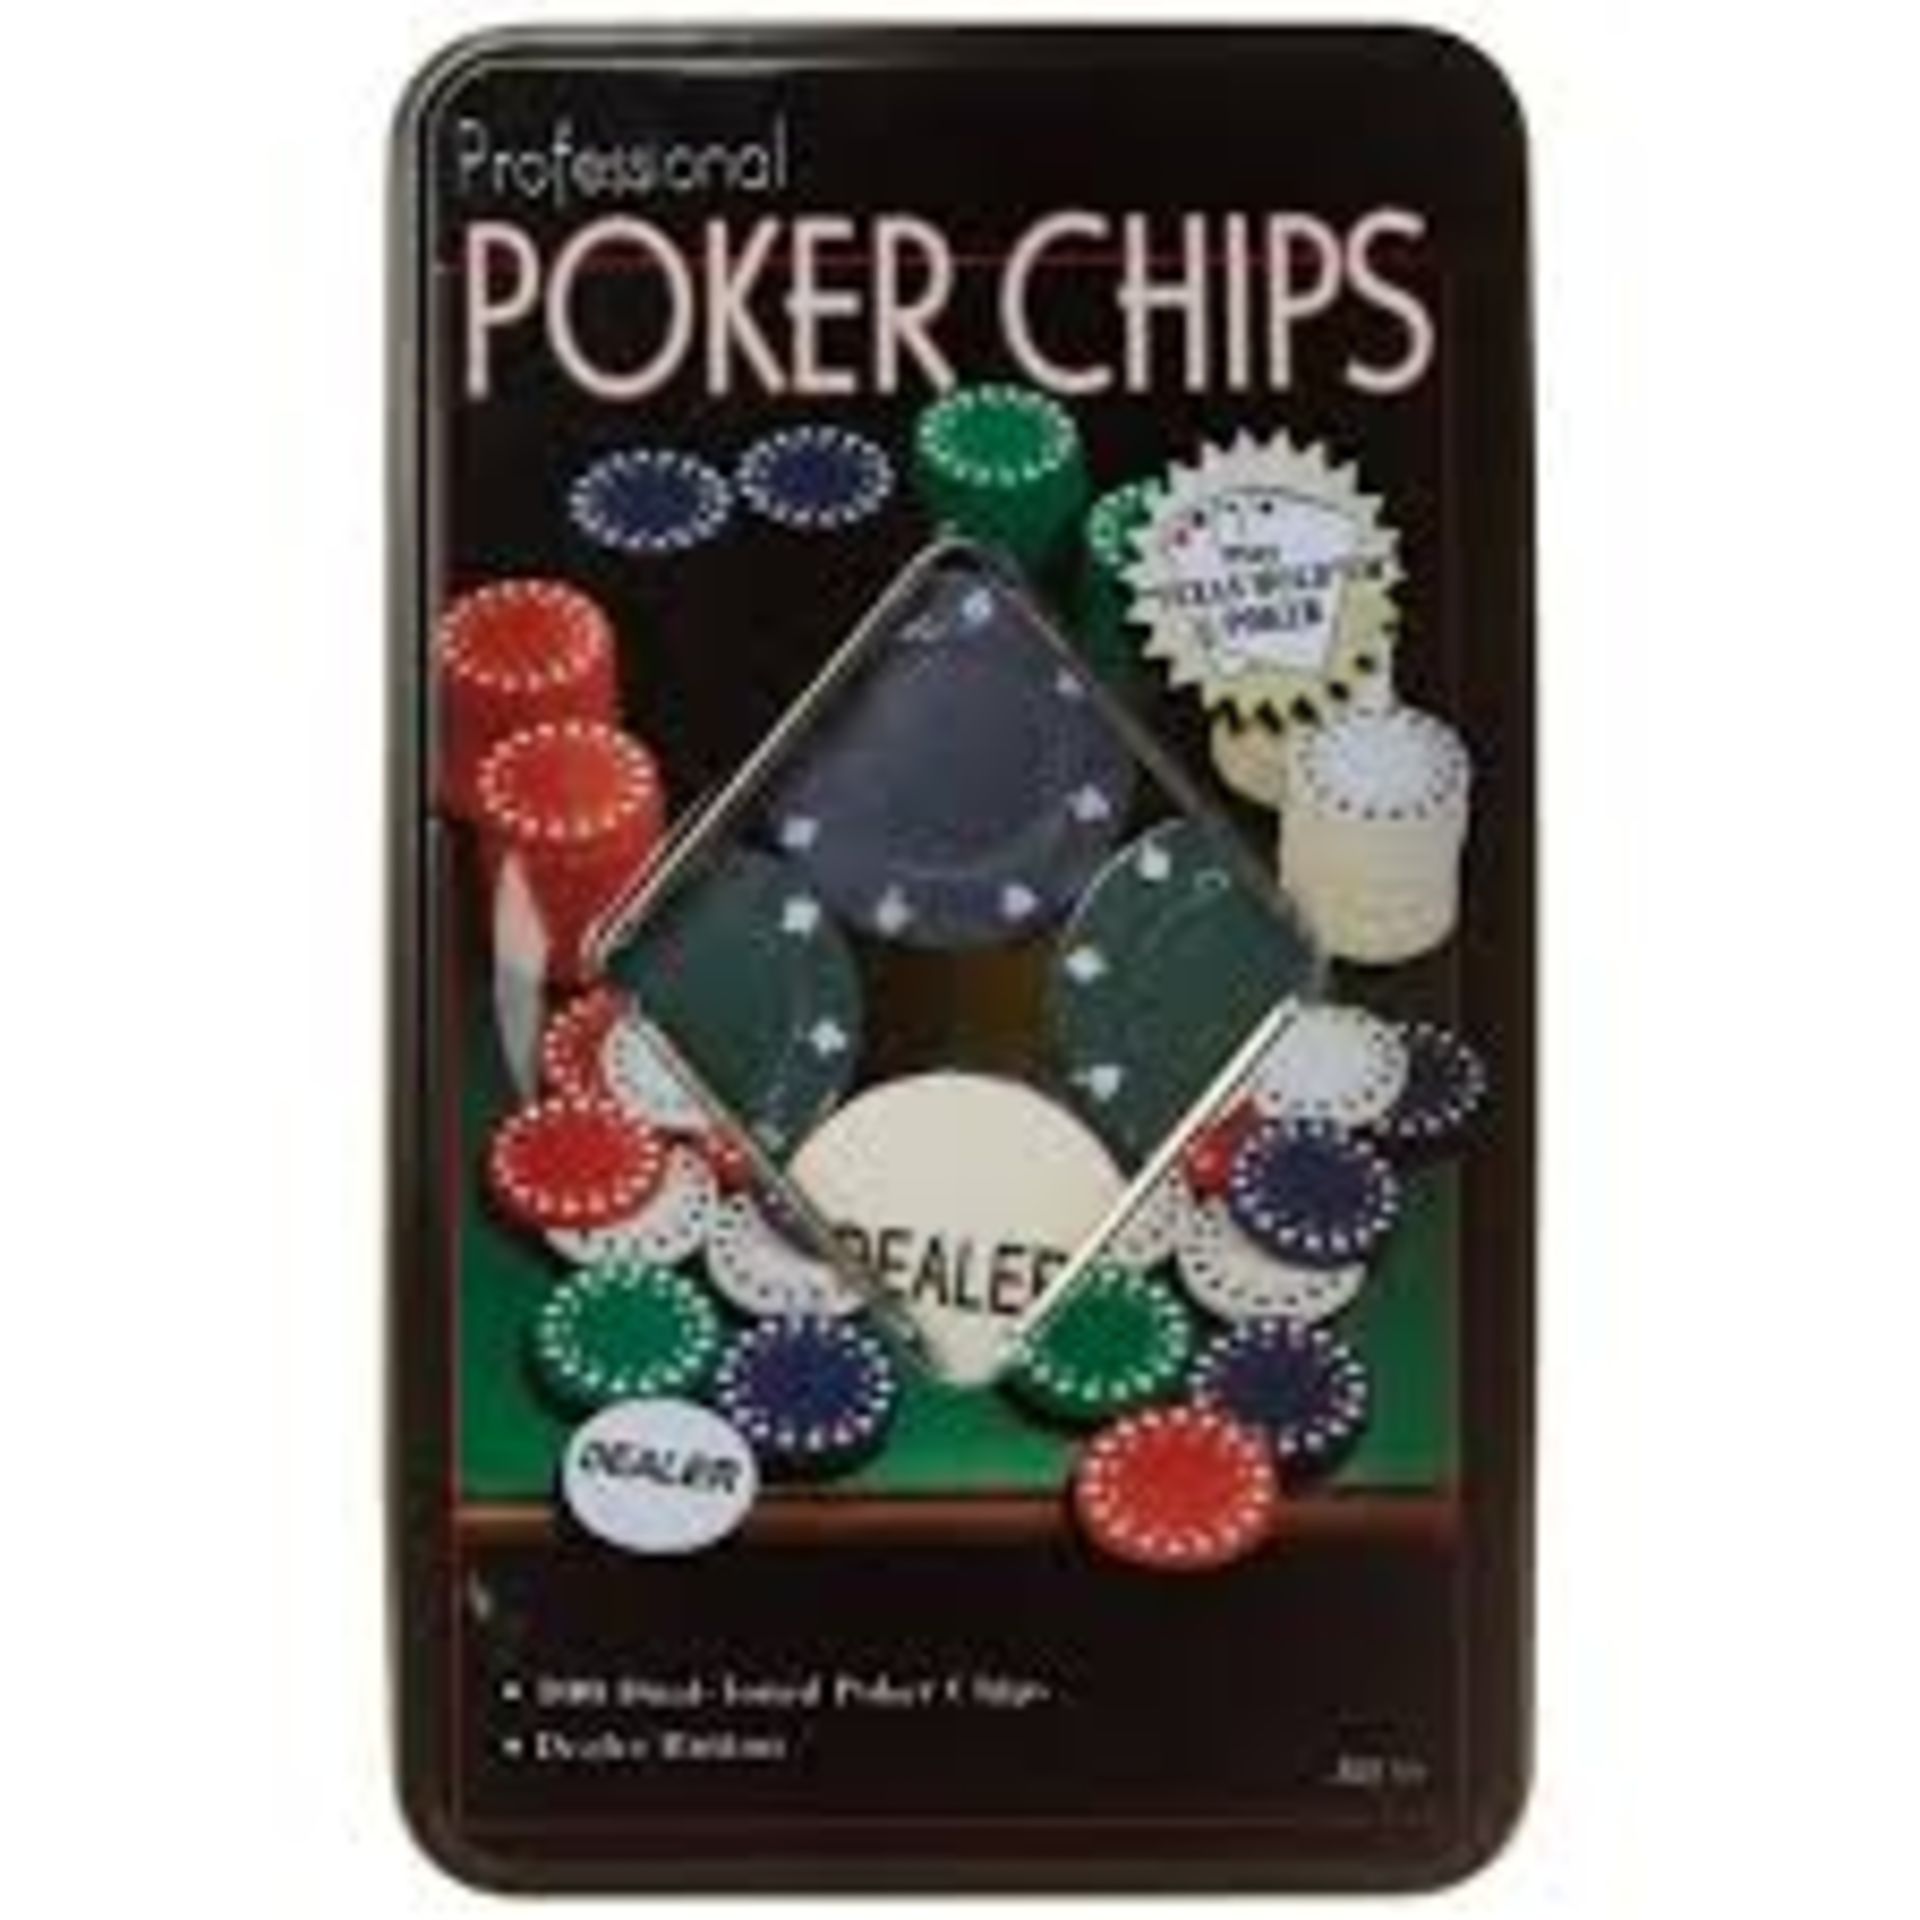 V *TRADE QTY* Brand New Box Of 100 Dual-Toned Professional Poker Chips Includes Dealer Button X 5